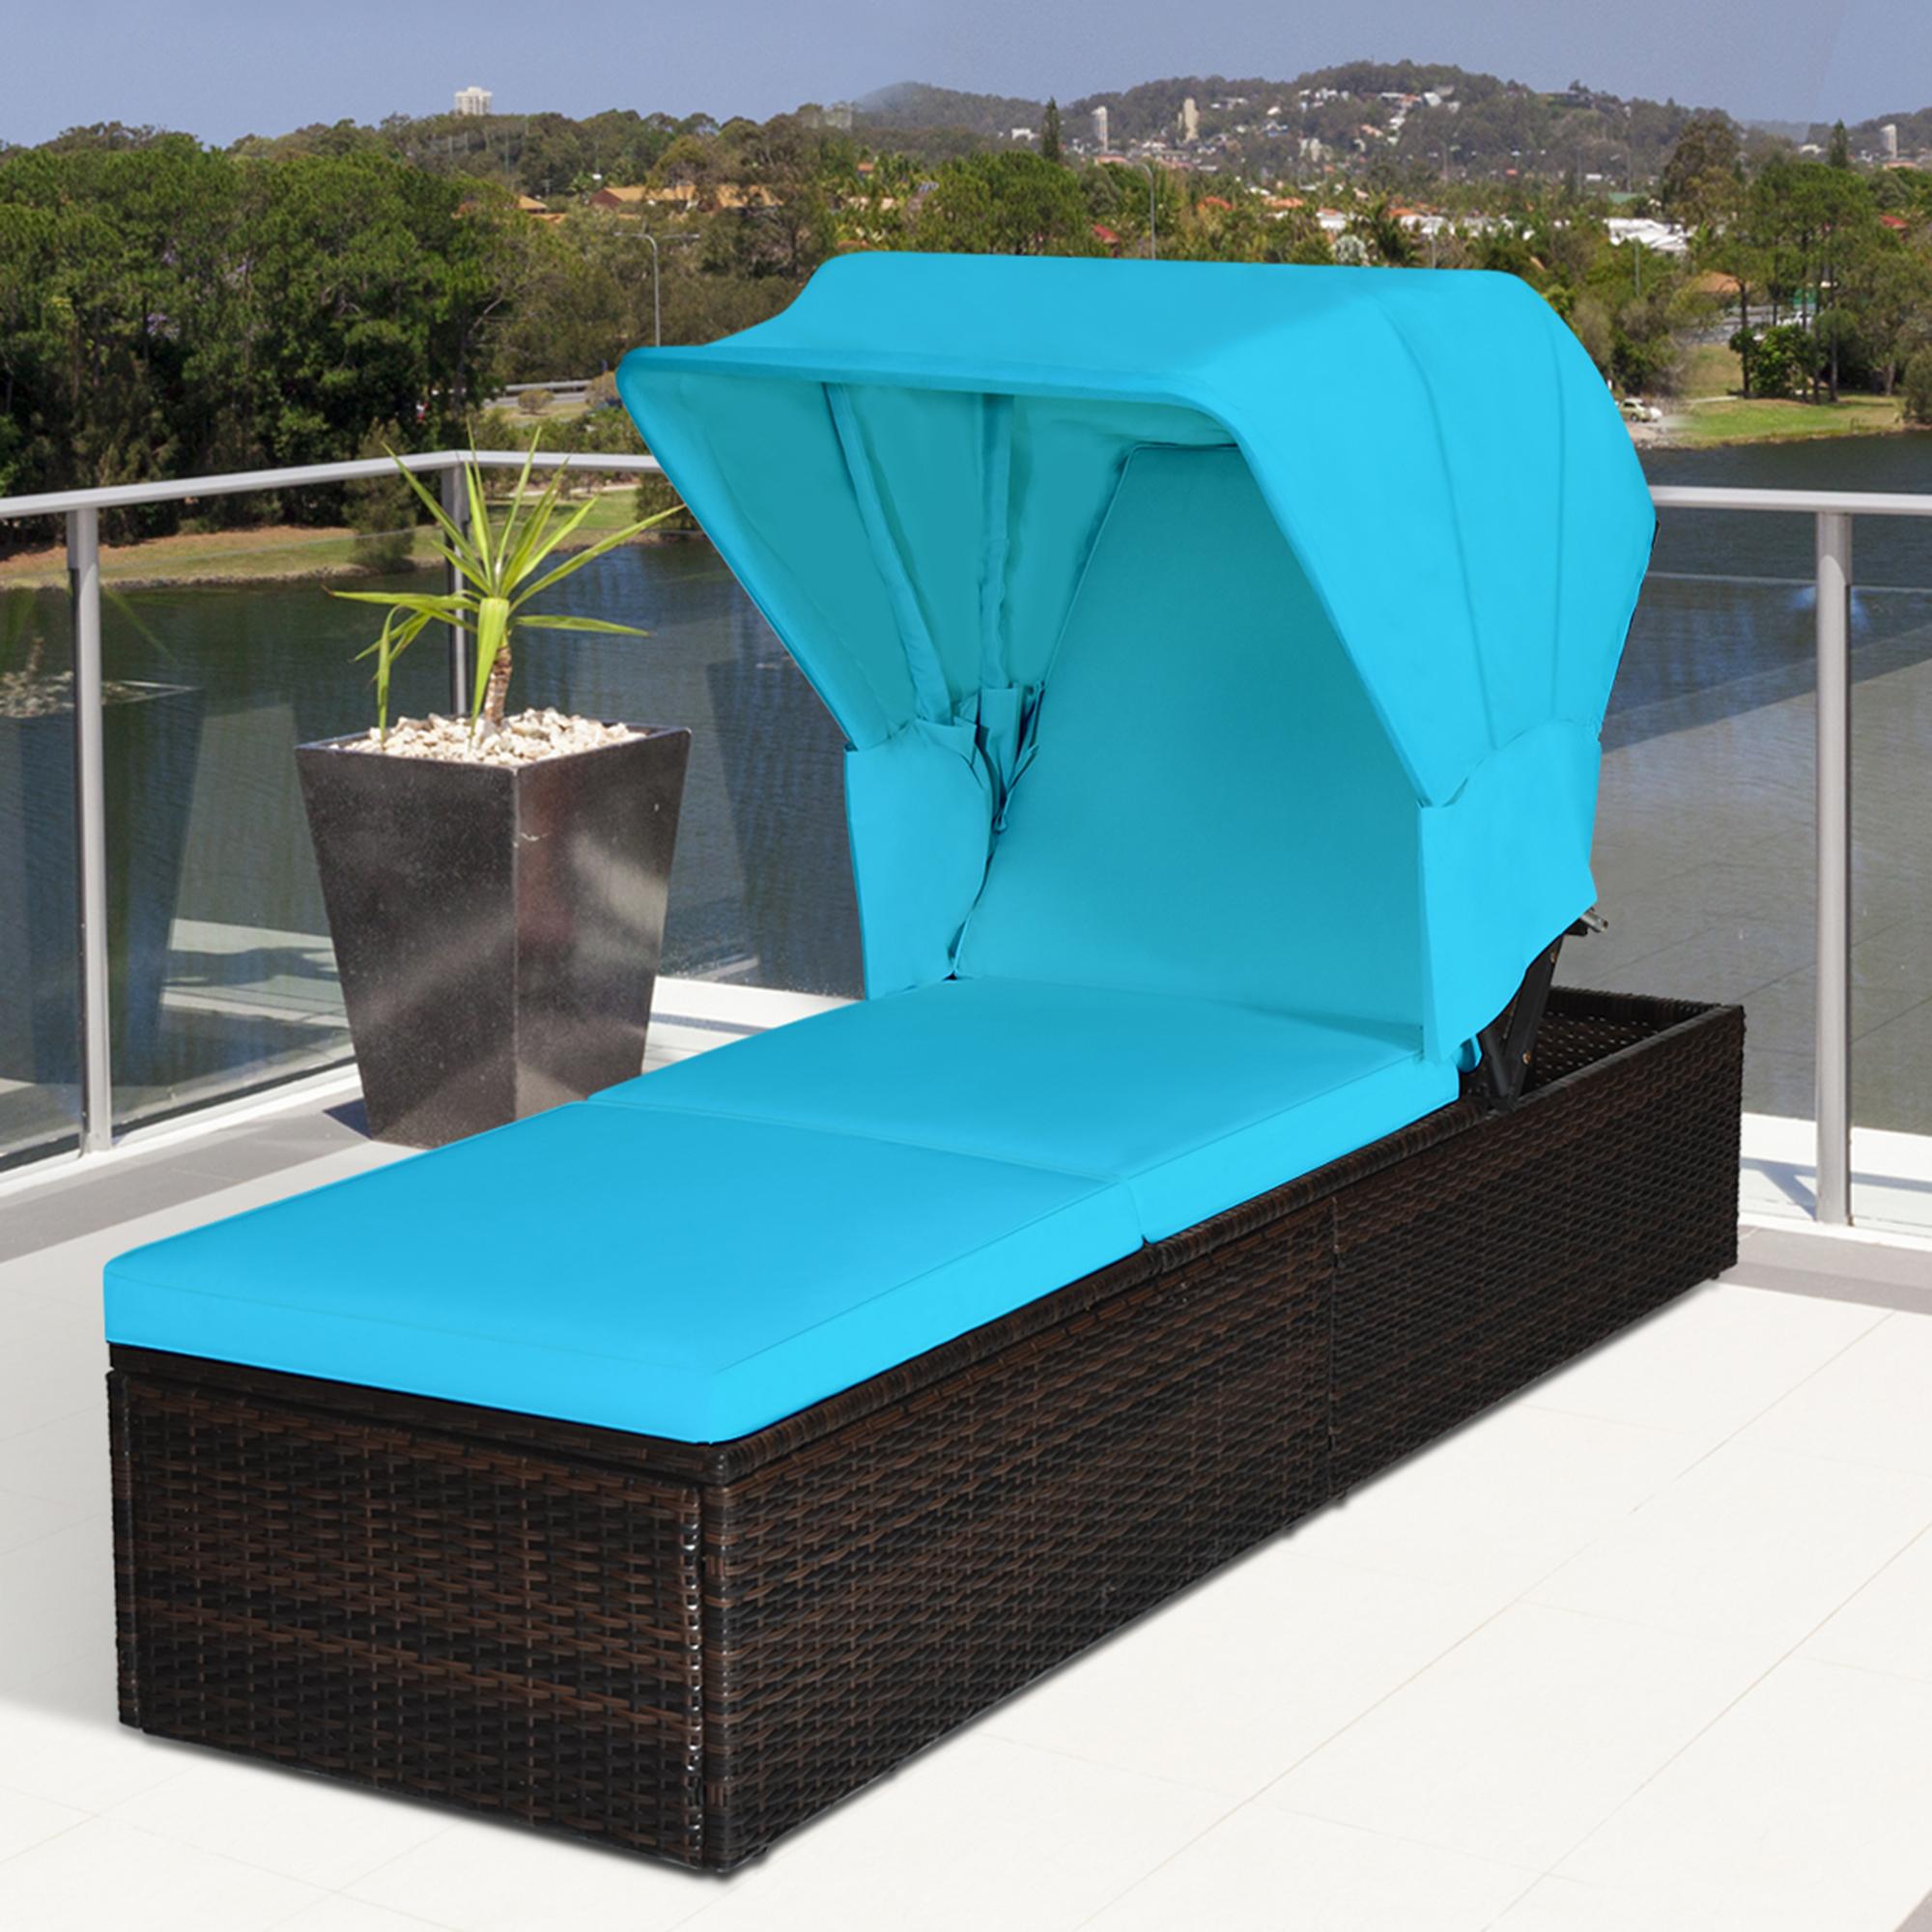 Gymax 2PCS Rattan Patio Chaise Lounge Chair W/ Adjustable Canopy Turquoise Cushion - image 3 of 10